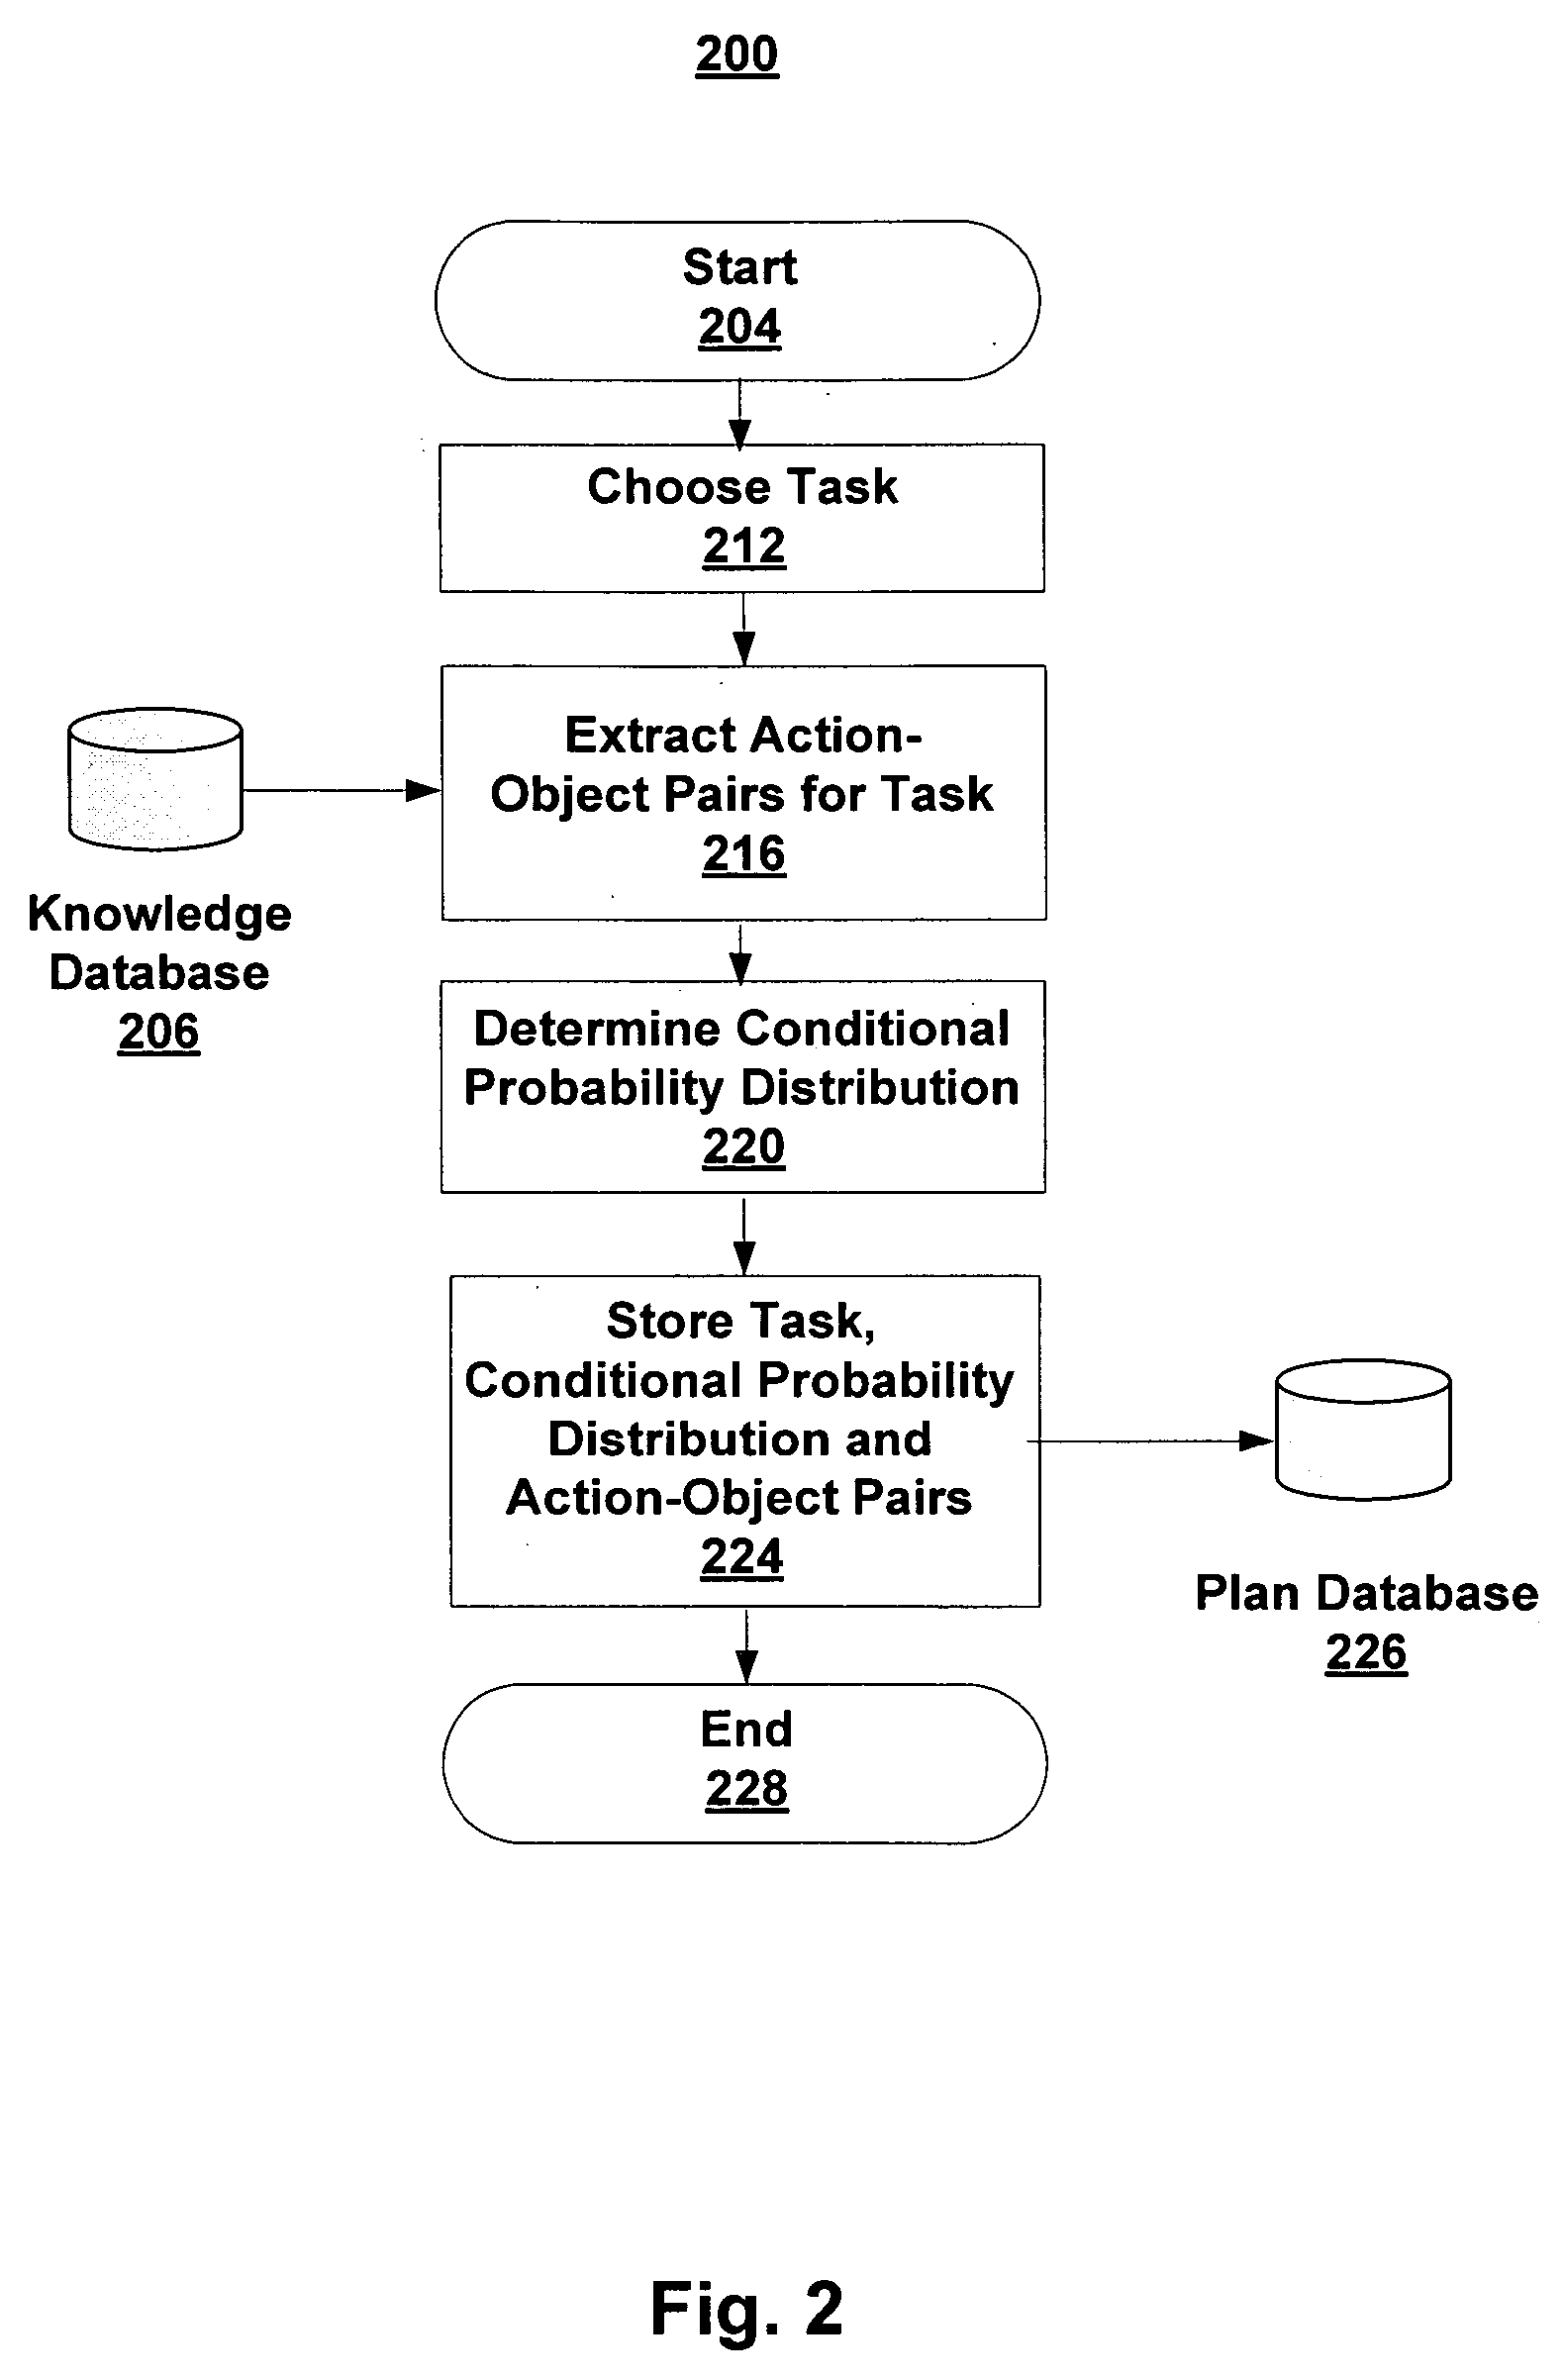 Building plans for household tasks from distributed knowledge